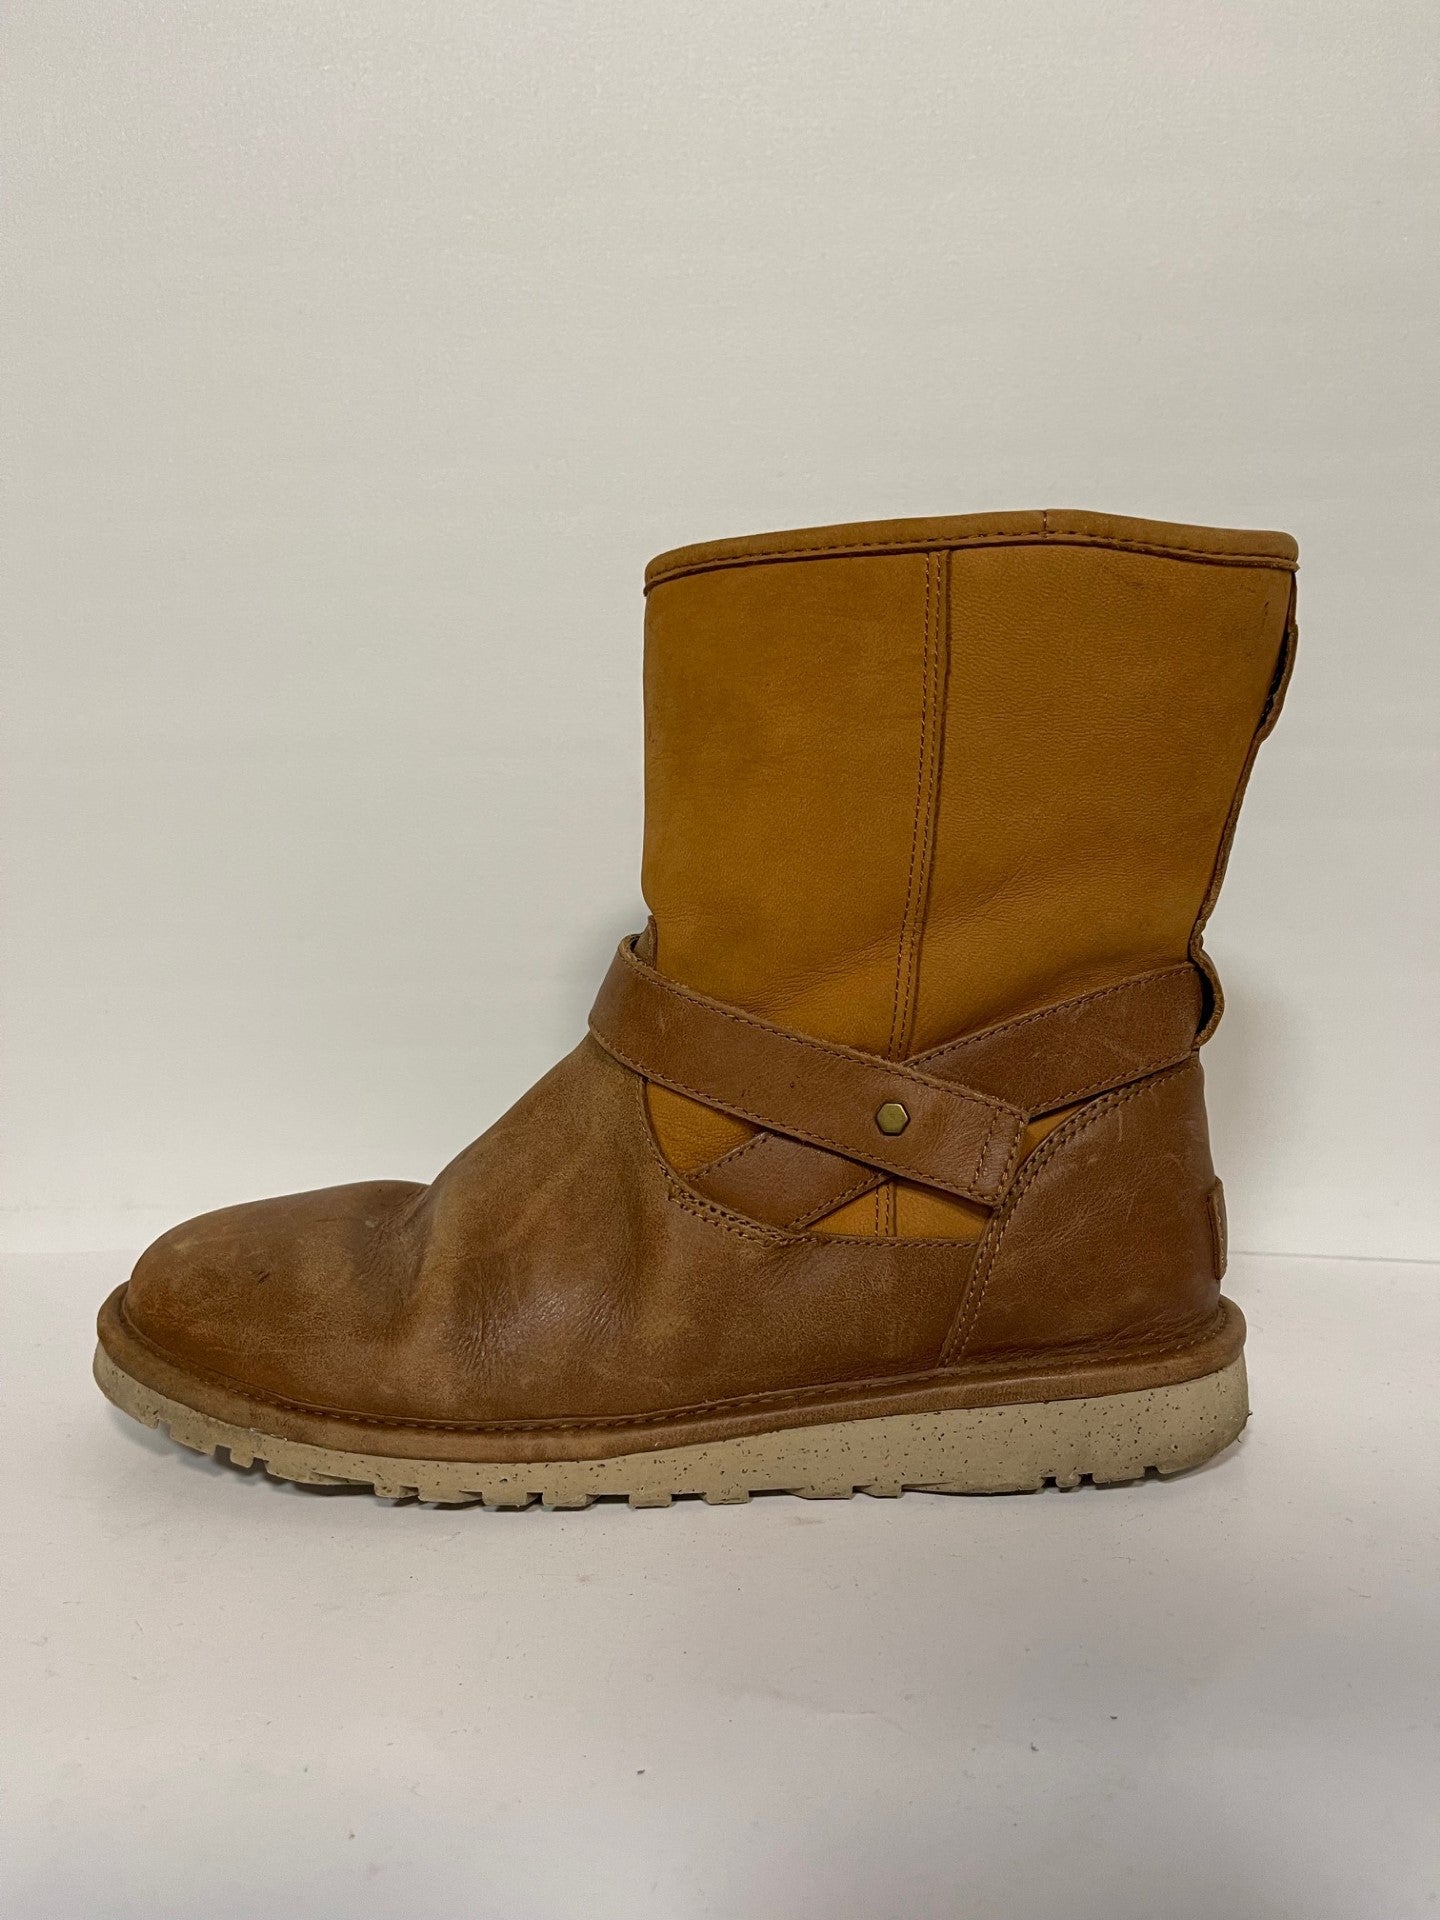 UGG Brown Anali Boots Size 7.5